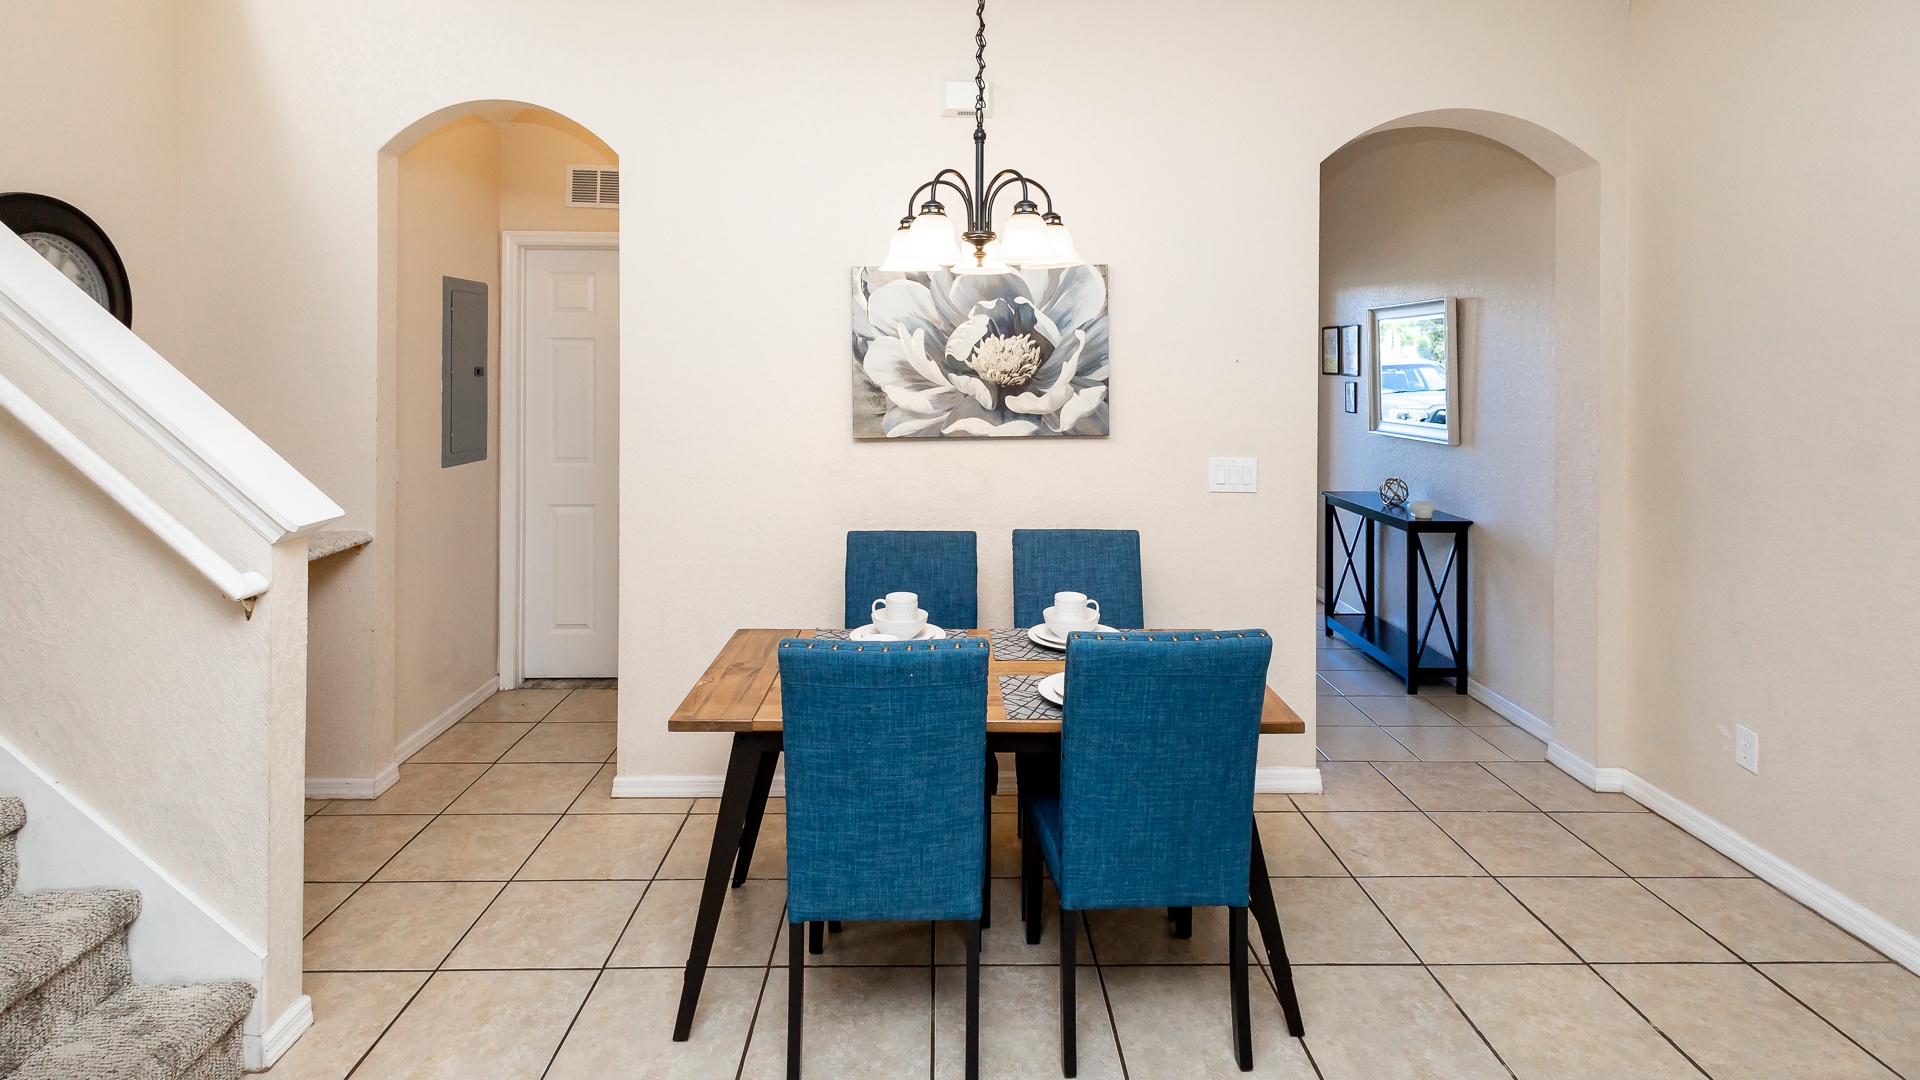 Gather for meals & visiting together at the dining table, with seating for 4